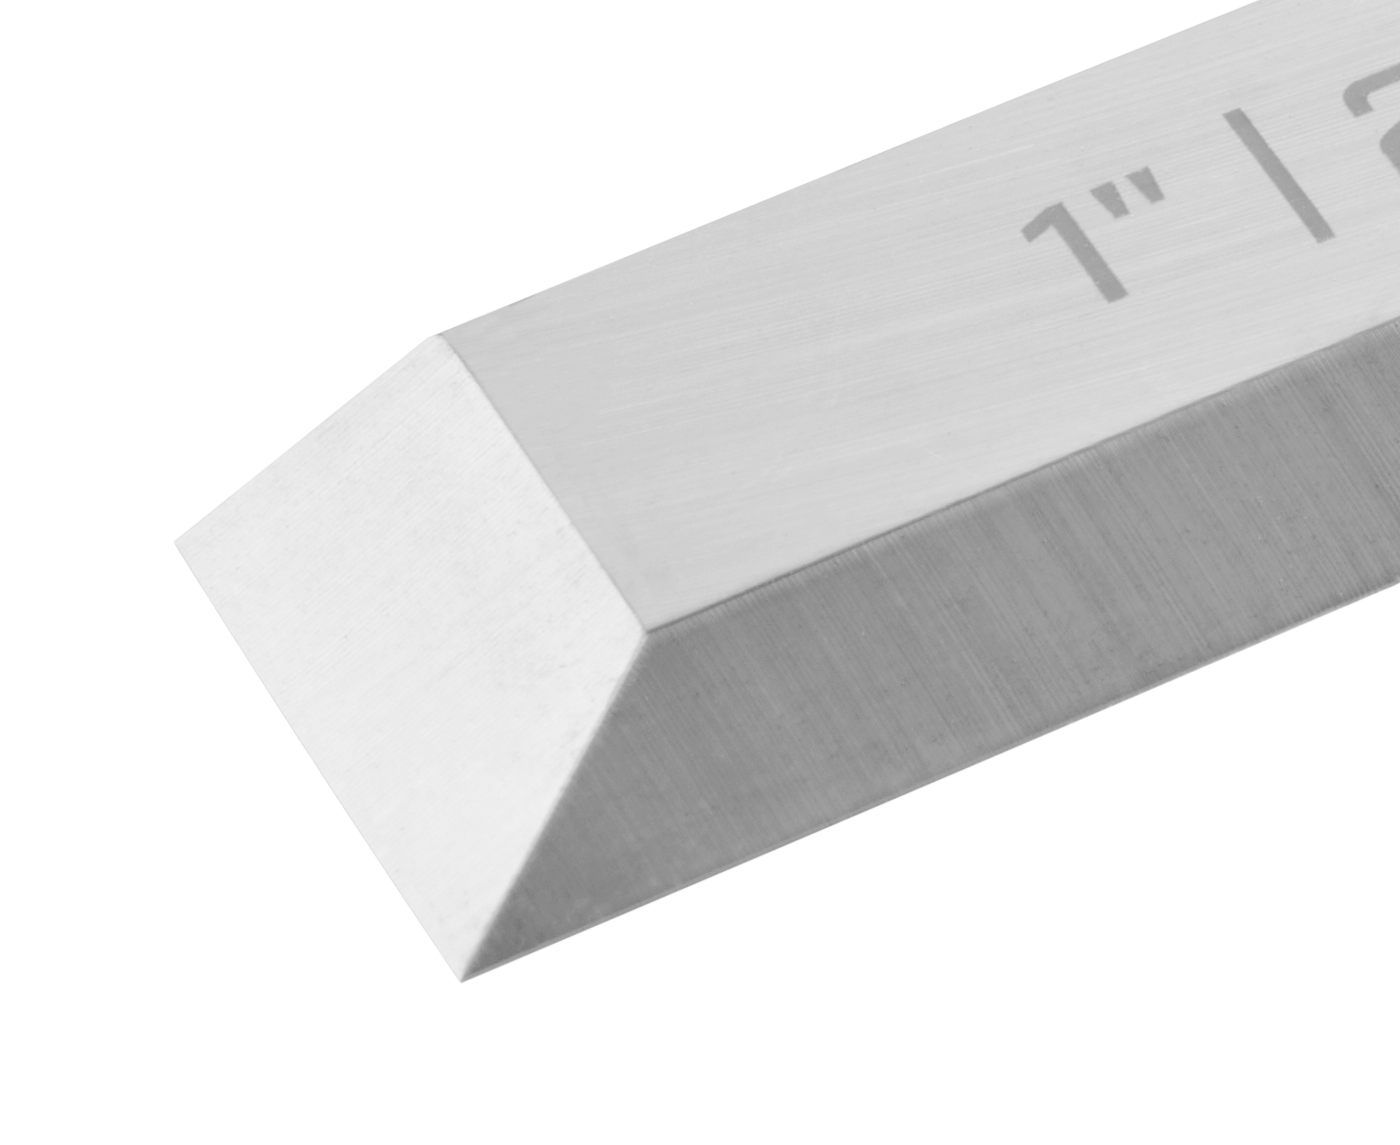 HART 1-Inch Cutting Chisel, Dual Cutting Edges - image 2 of 6